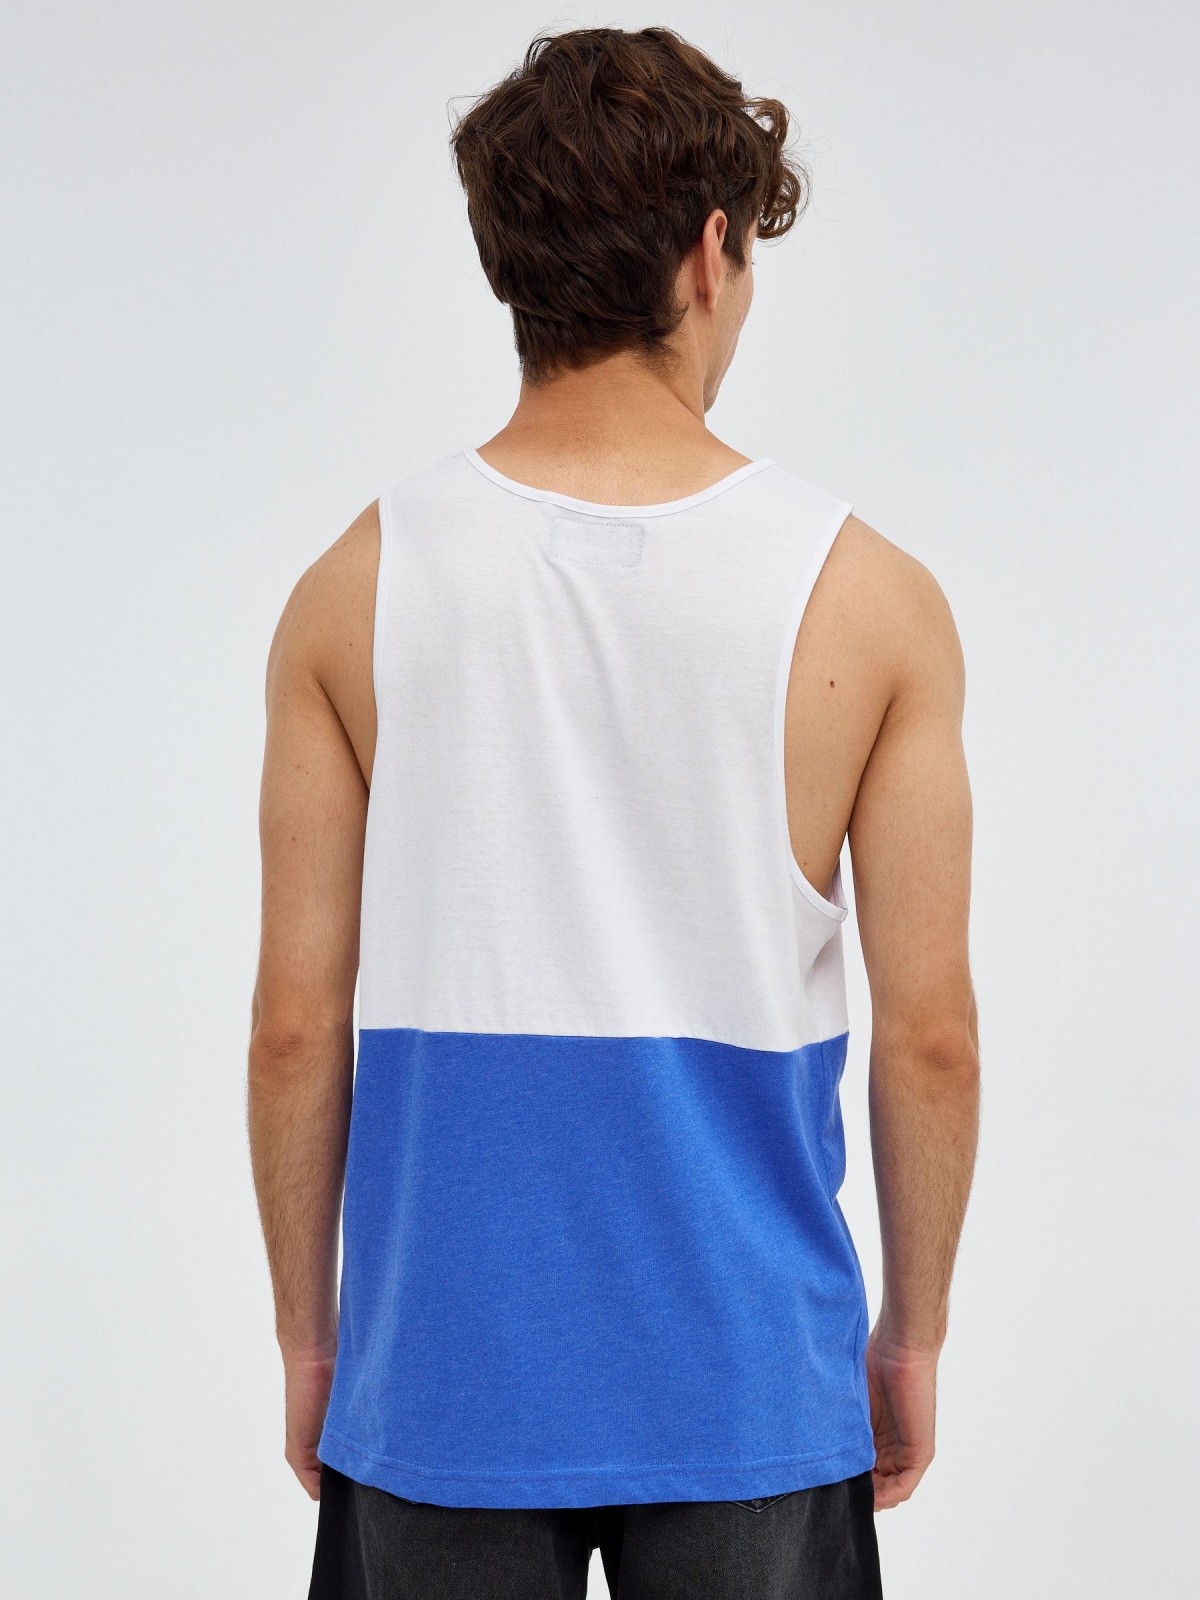 T-shirt do tanque Tecnhology electric blue middle back view